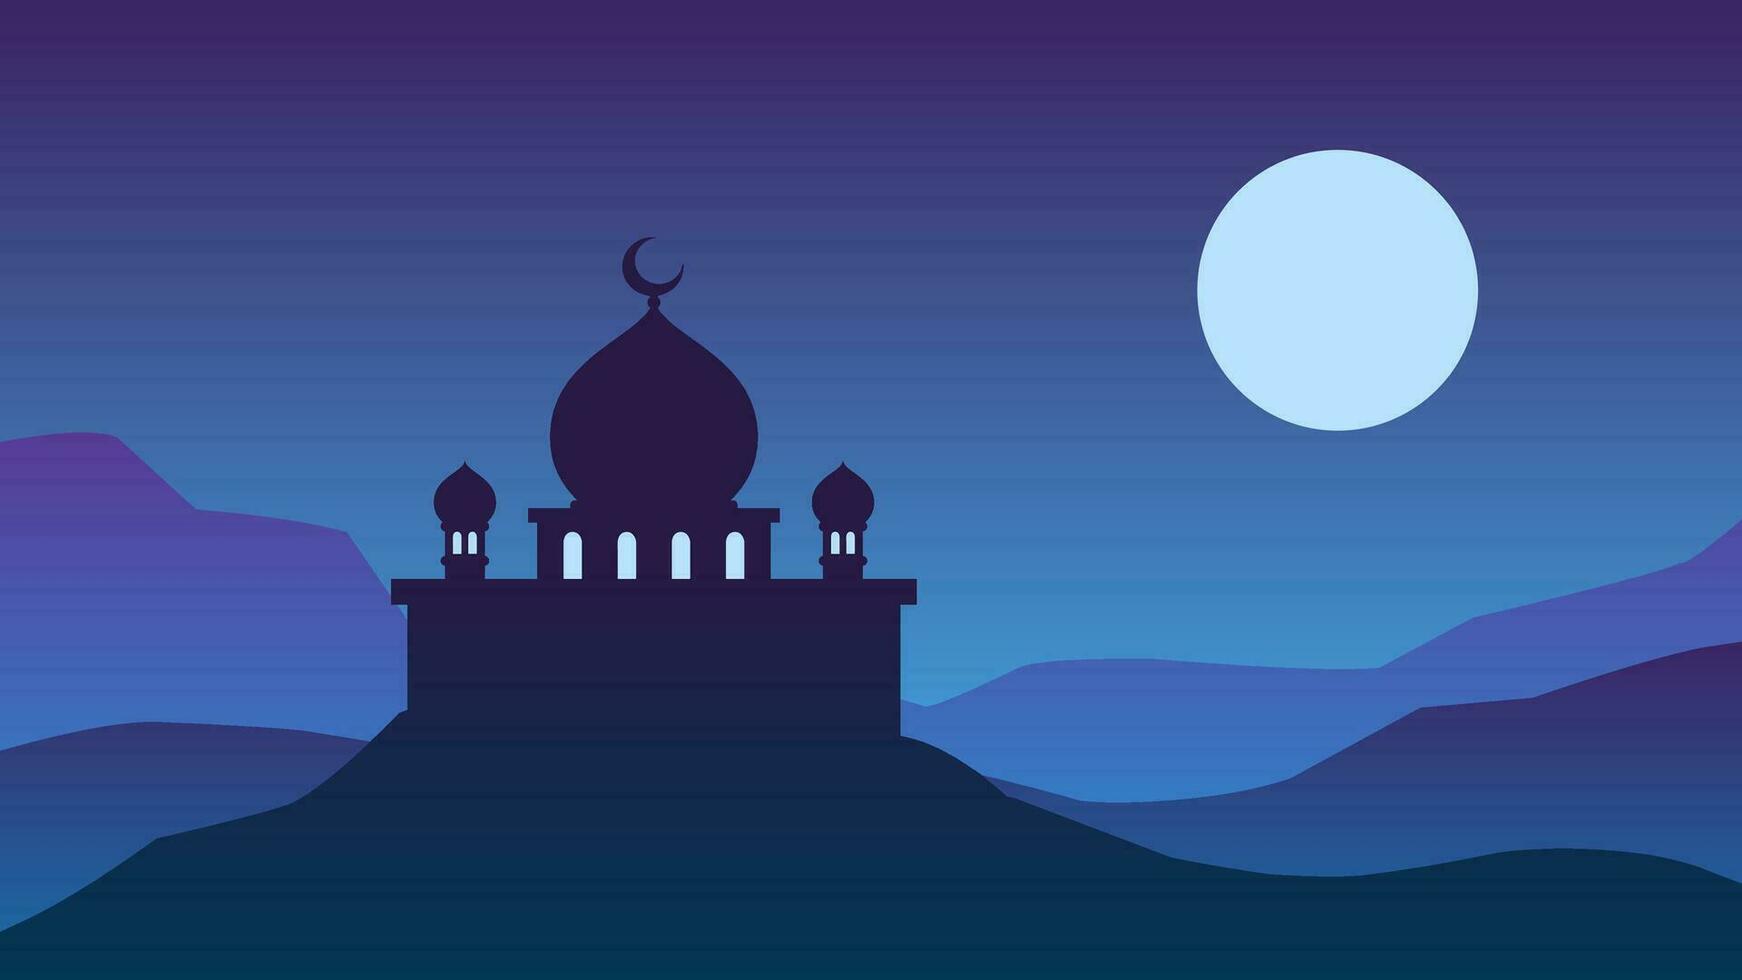 Mosque silhouette landscape at night vector illustration. Mosque in the night sky with moon for eid mubarak. Ramadan design graphic in muslim culture and islam religion